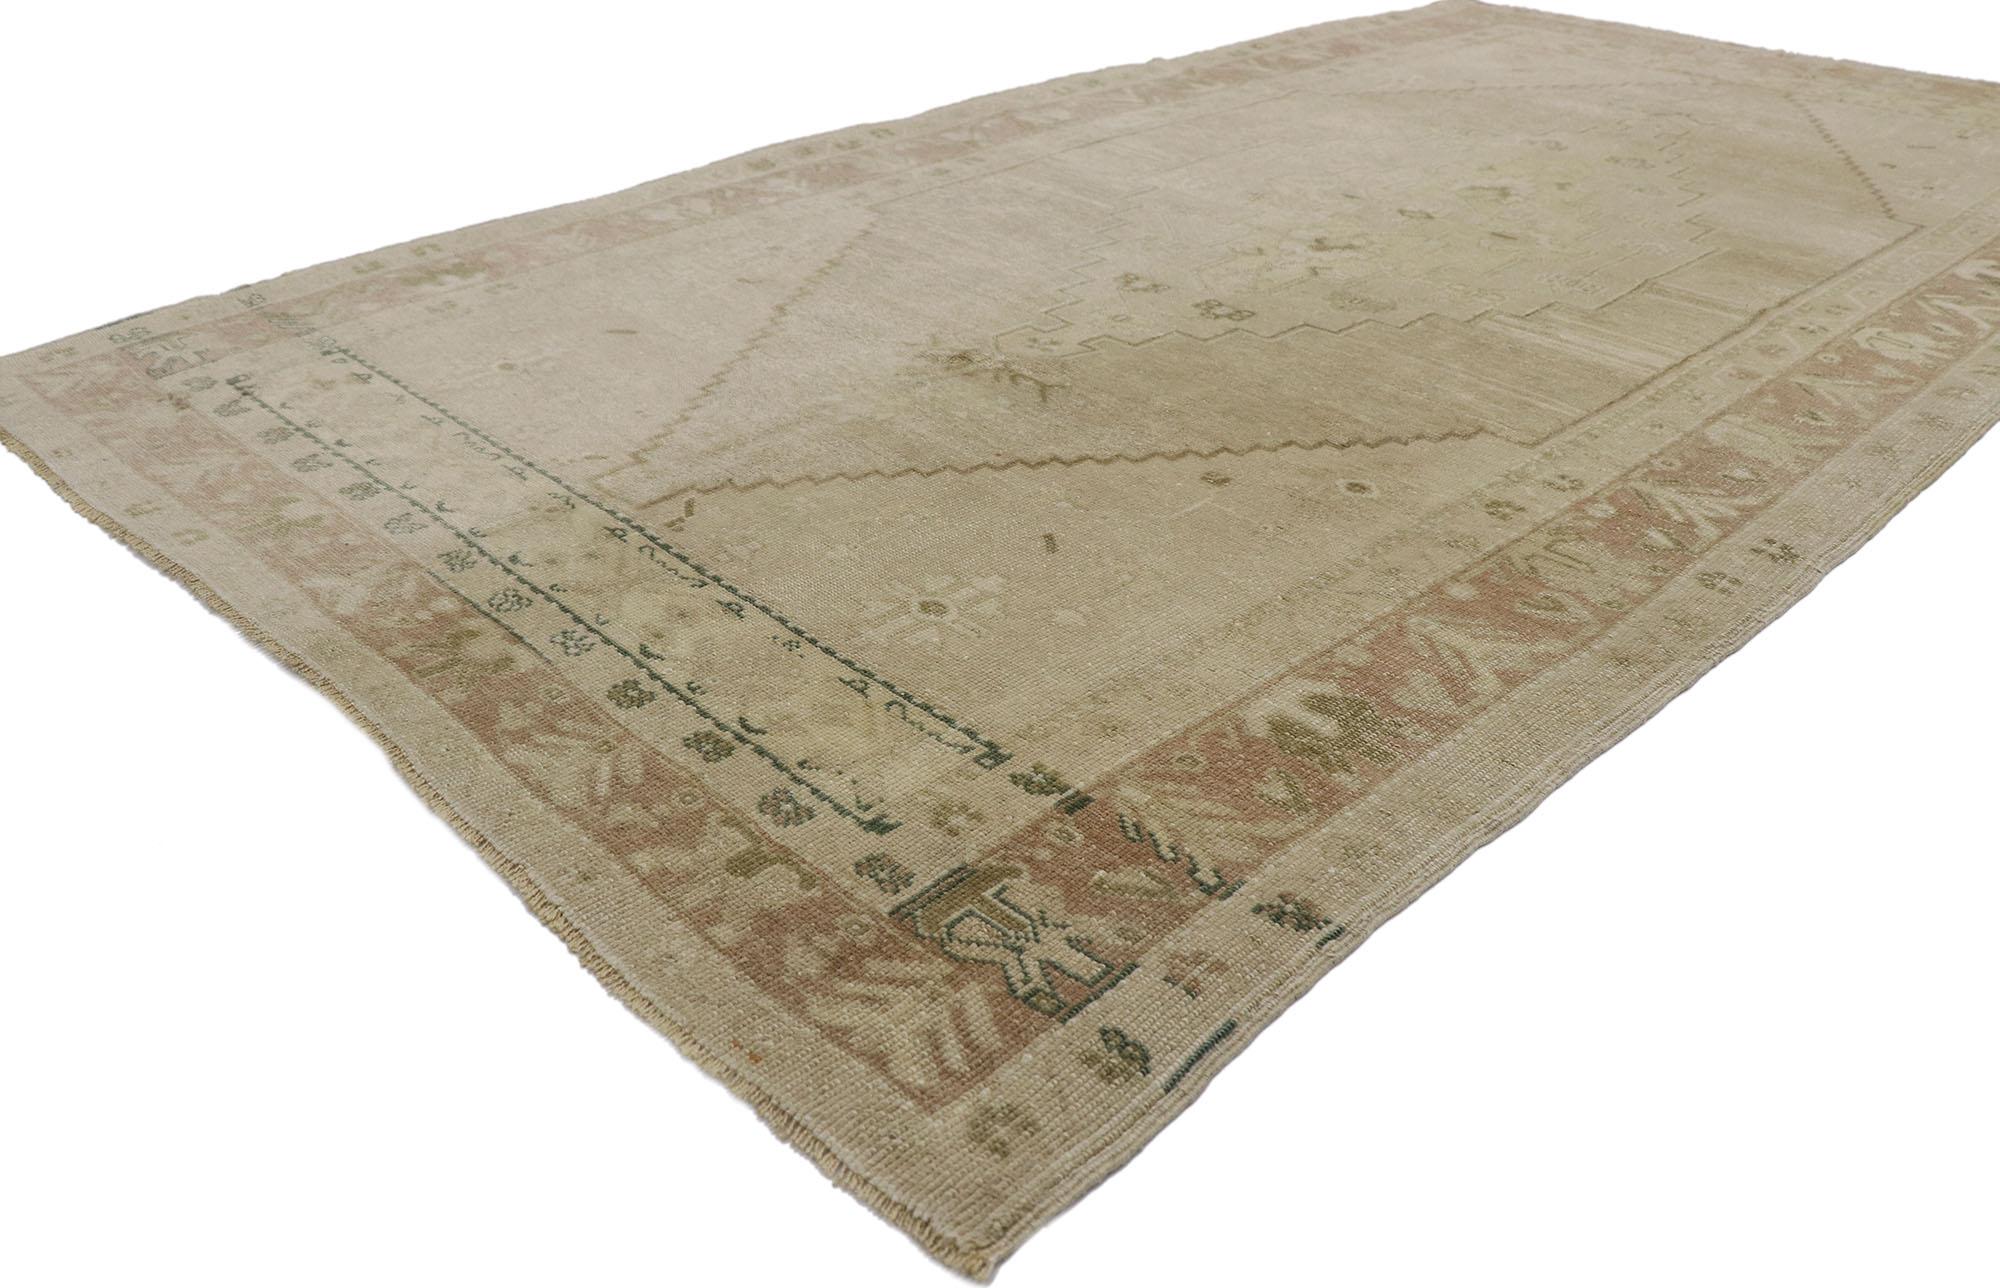 53624 Vintage Turkish Oushak rug with Modern Farmhouse style 04'09 x 08'08. Emanating timeless appeal, effortless beauty and neutral hues, this hand knotted wool vintage Turkish Oushak gallery rug is poised to impress. The antique washed cut-out